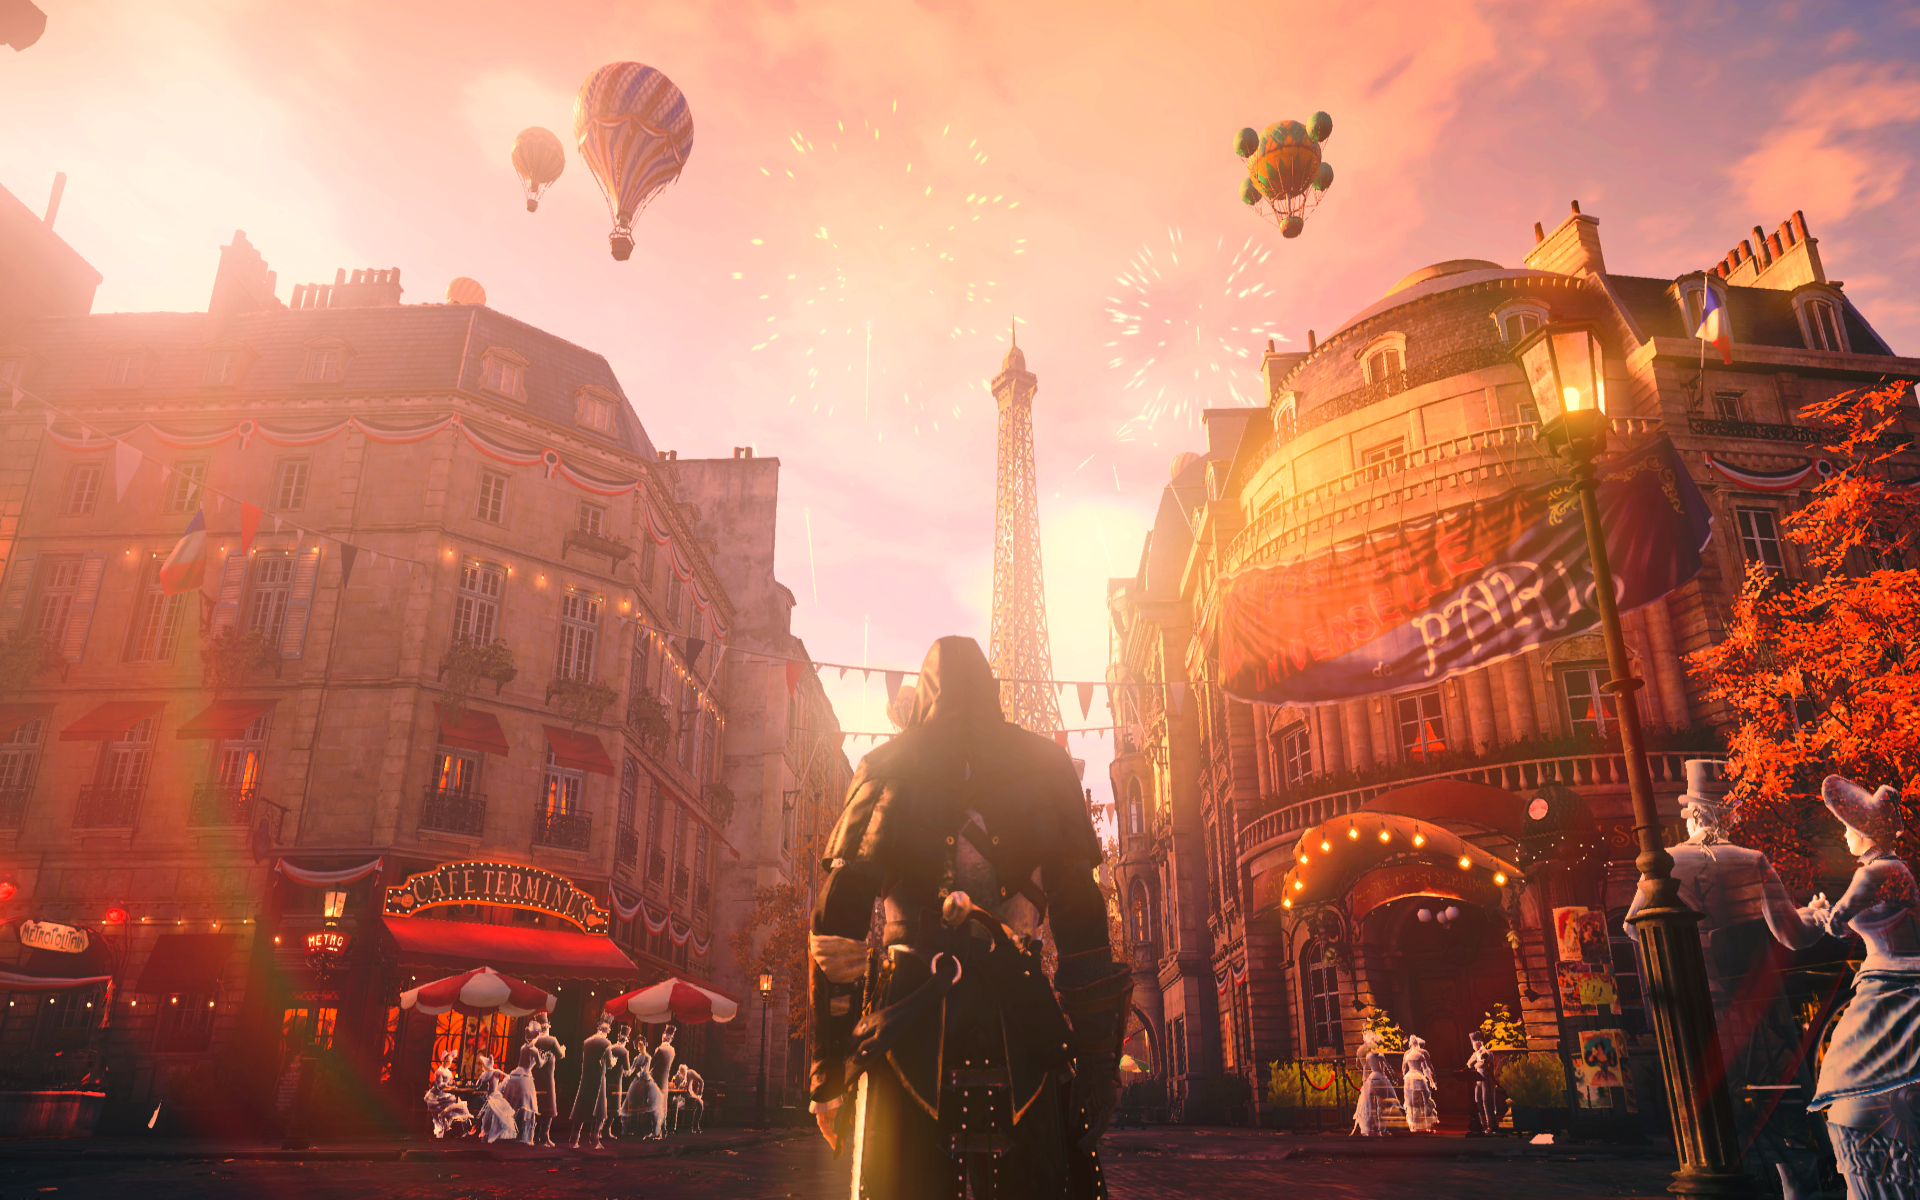 General 1920x1200 Assassin's Creed Unity Assassin's Creed Ubisoft video games building video game art screen shot sunset sunset glow hot air balloons clouds sunlight fireworks rainbows sky sign video game characters CGI